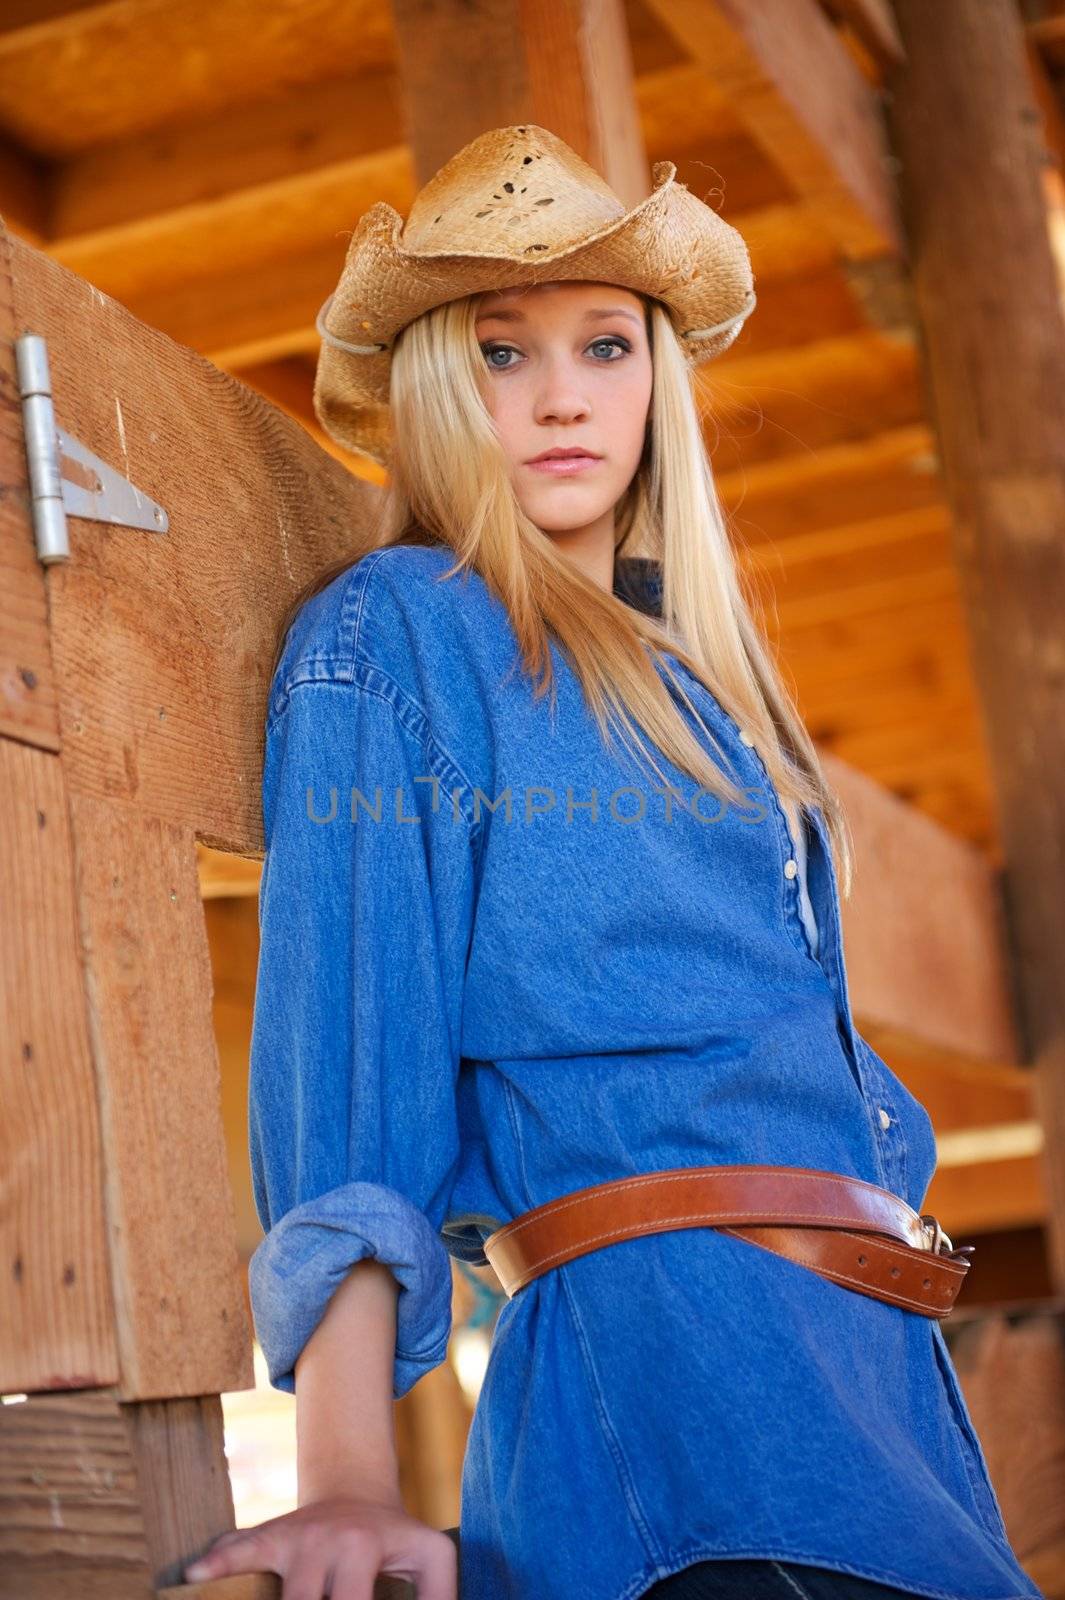 Blond Teen Model with Cowboy Hat in Wood Barn by pixelsnap